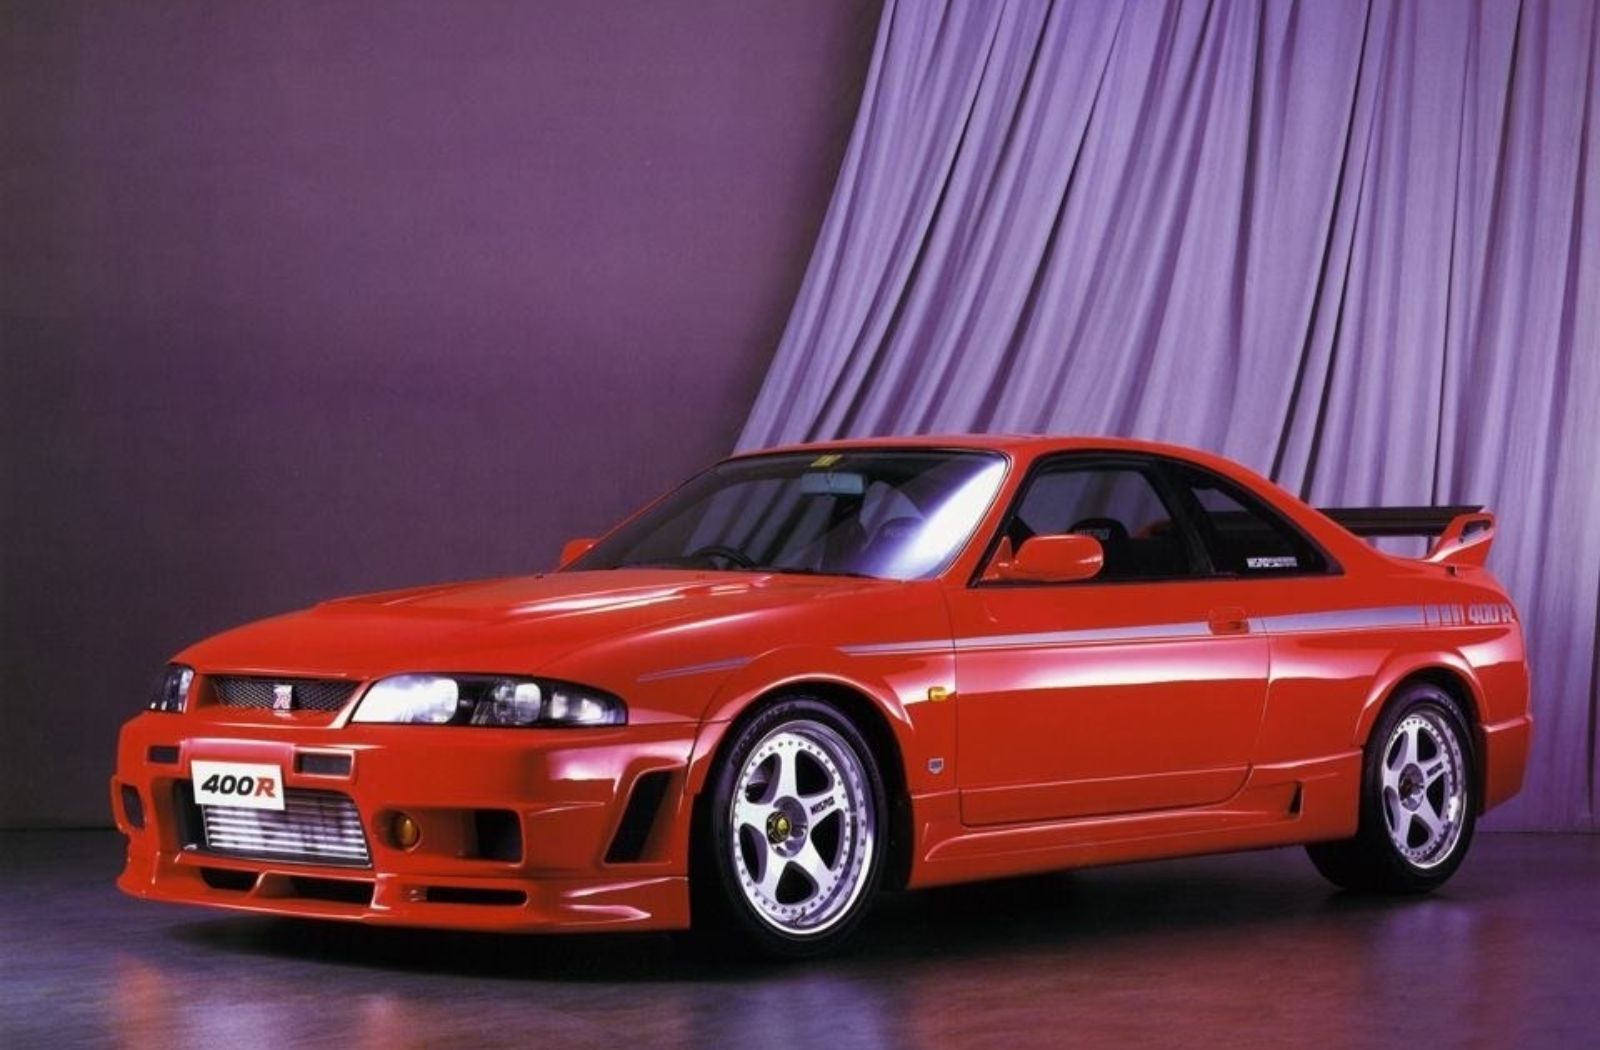 Nismo 400R: A JDM Legend From the 1990s and One of the Rarest GT-R 